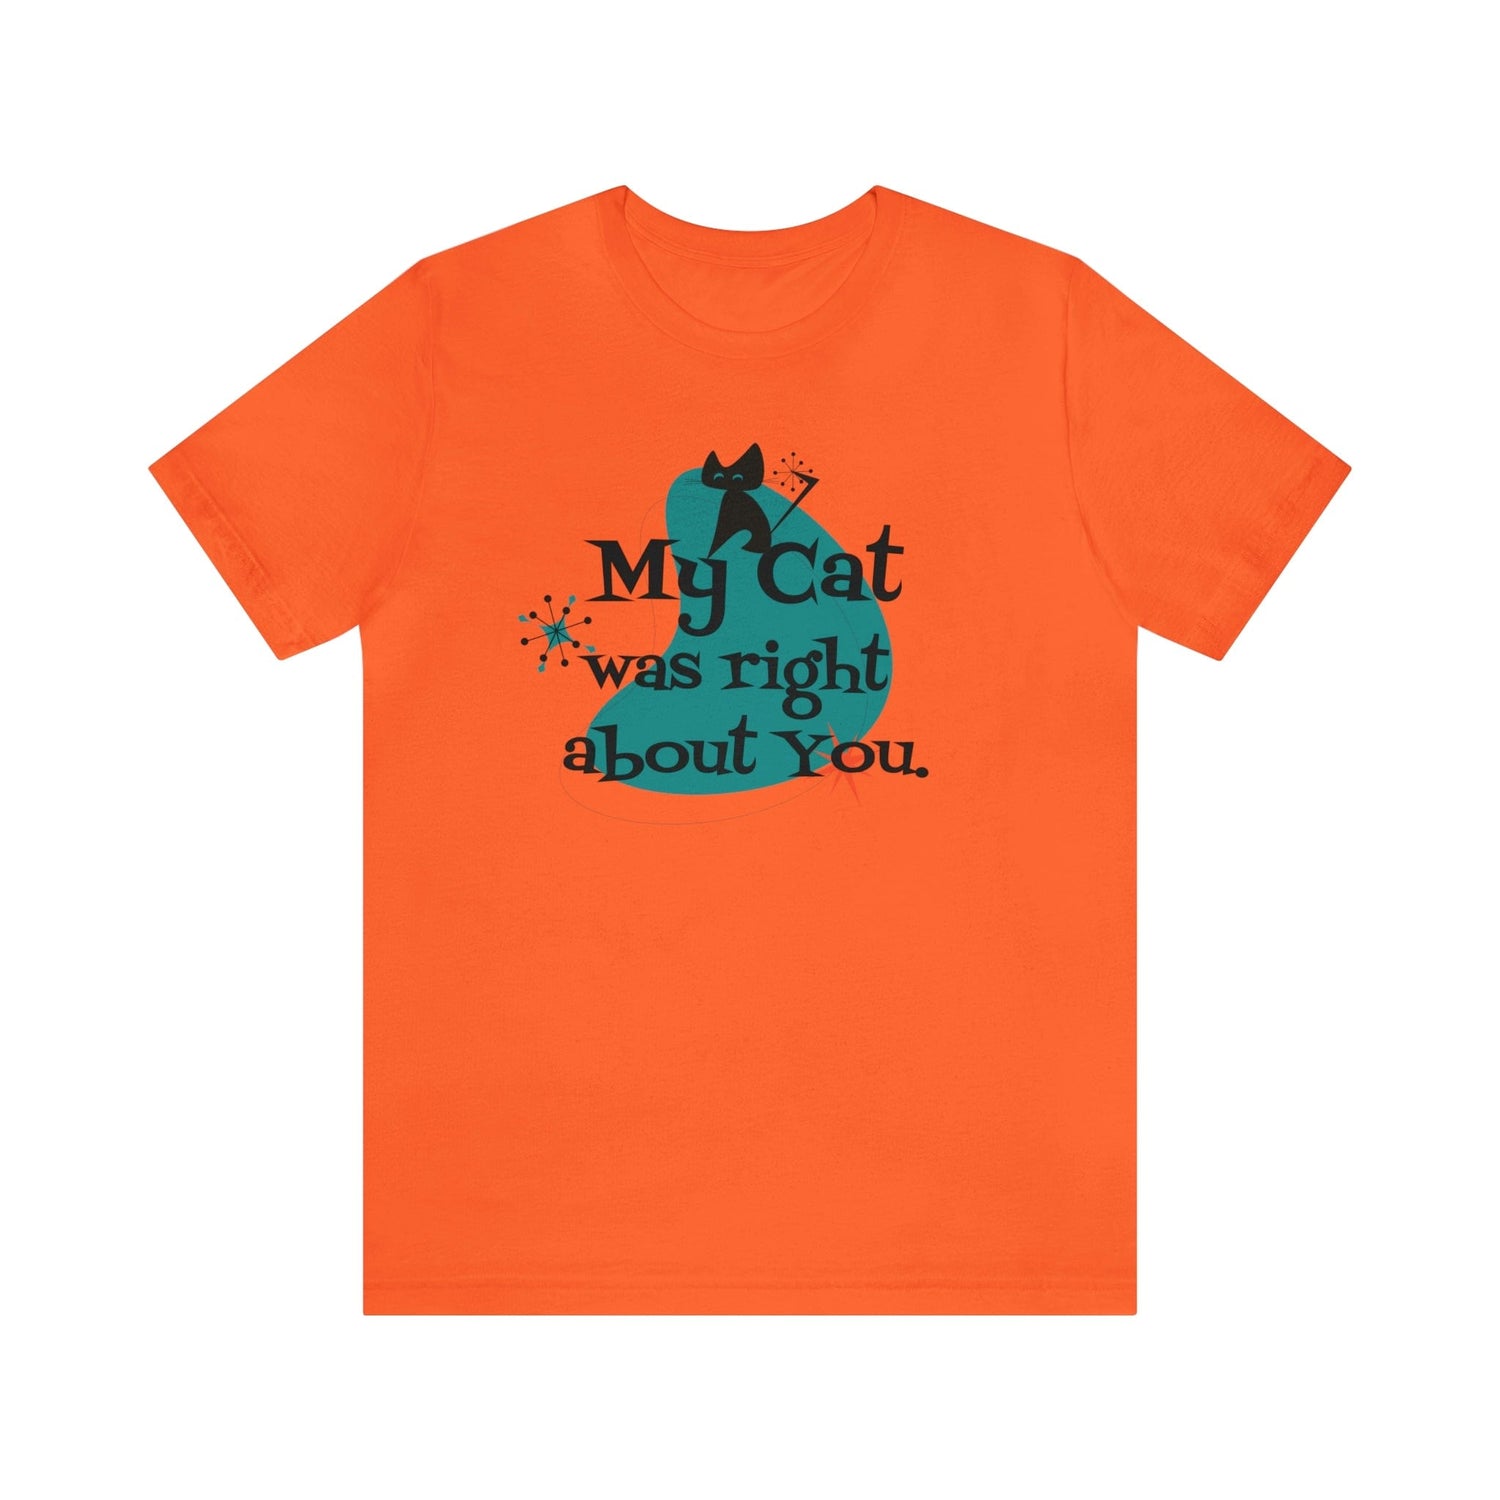 Atomic Cat, Kitschy Funny, My Cat Was Right About You, Cat Lover Unisex Short Sleeve Tee T-Shirt Orange / S